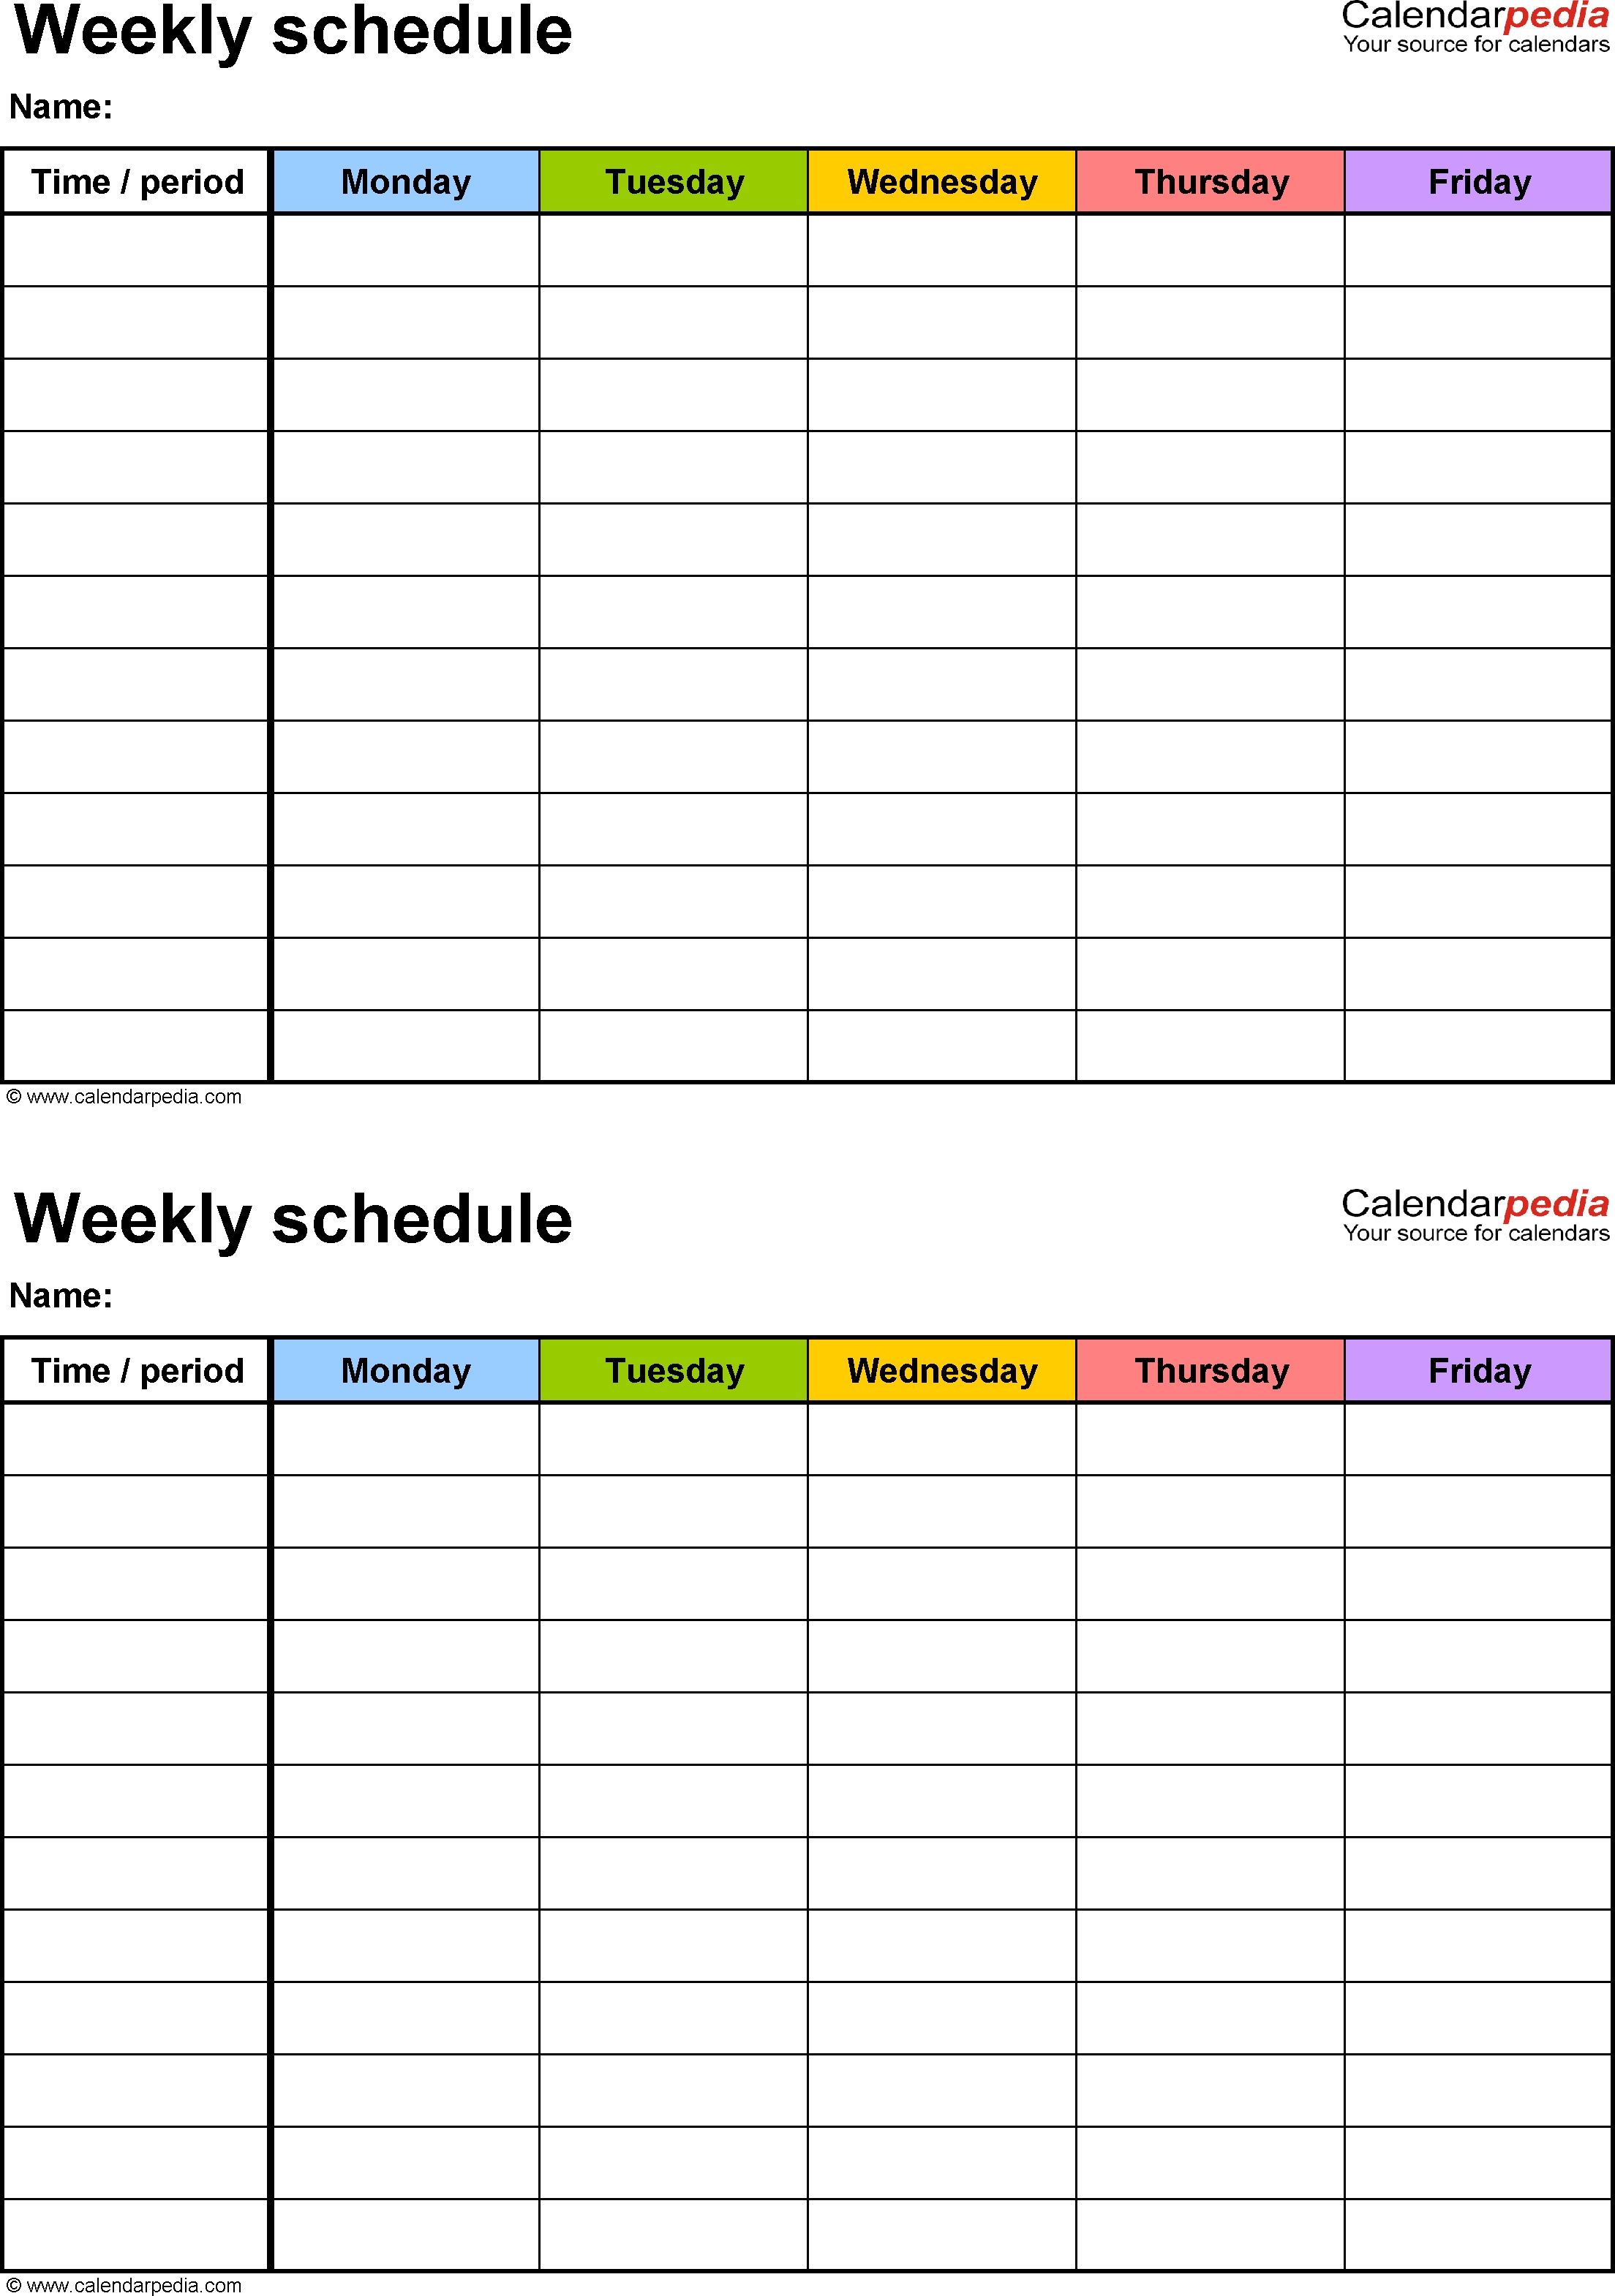 Free Weekly Schedule Templates For Excel - 18 Templates regarding 6 Weeks Holiday Timeline Template